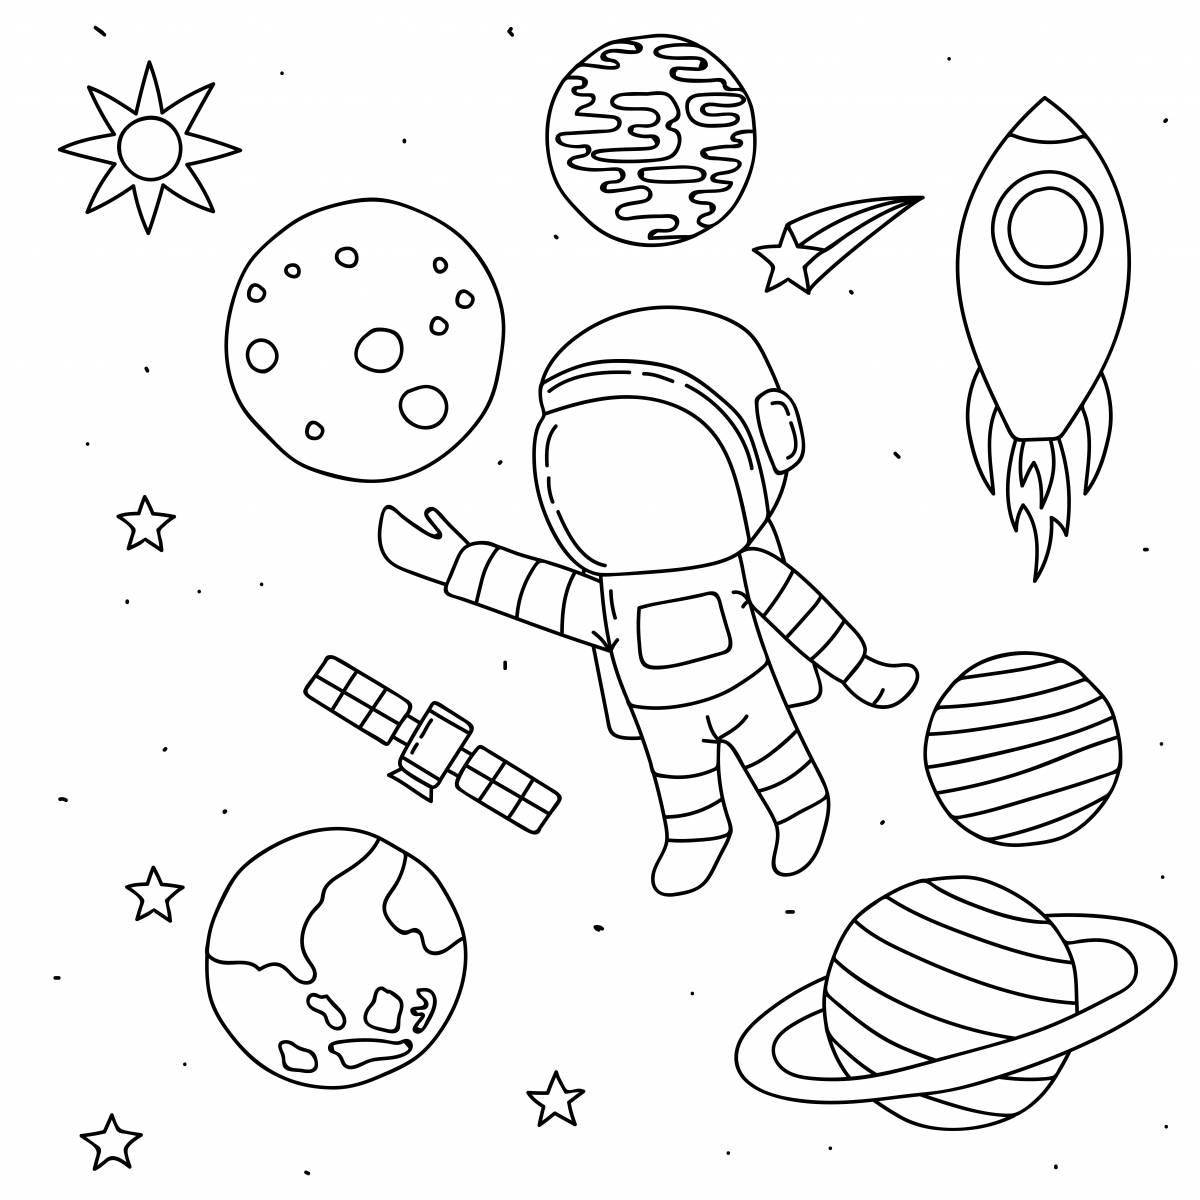 Colorful space coloring book for 4-5 year olds